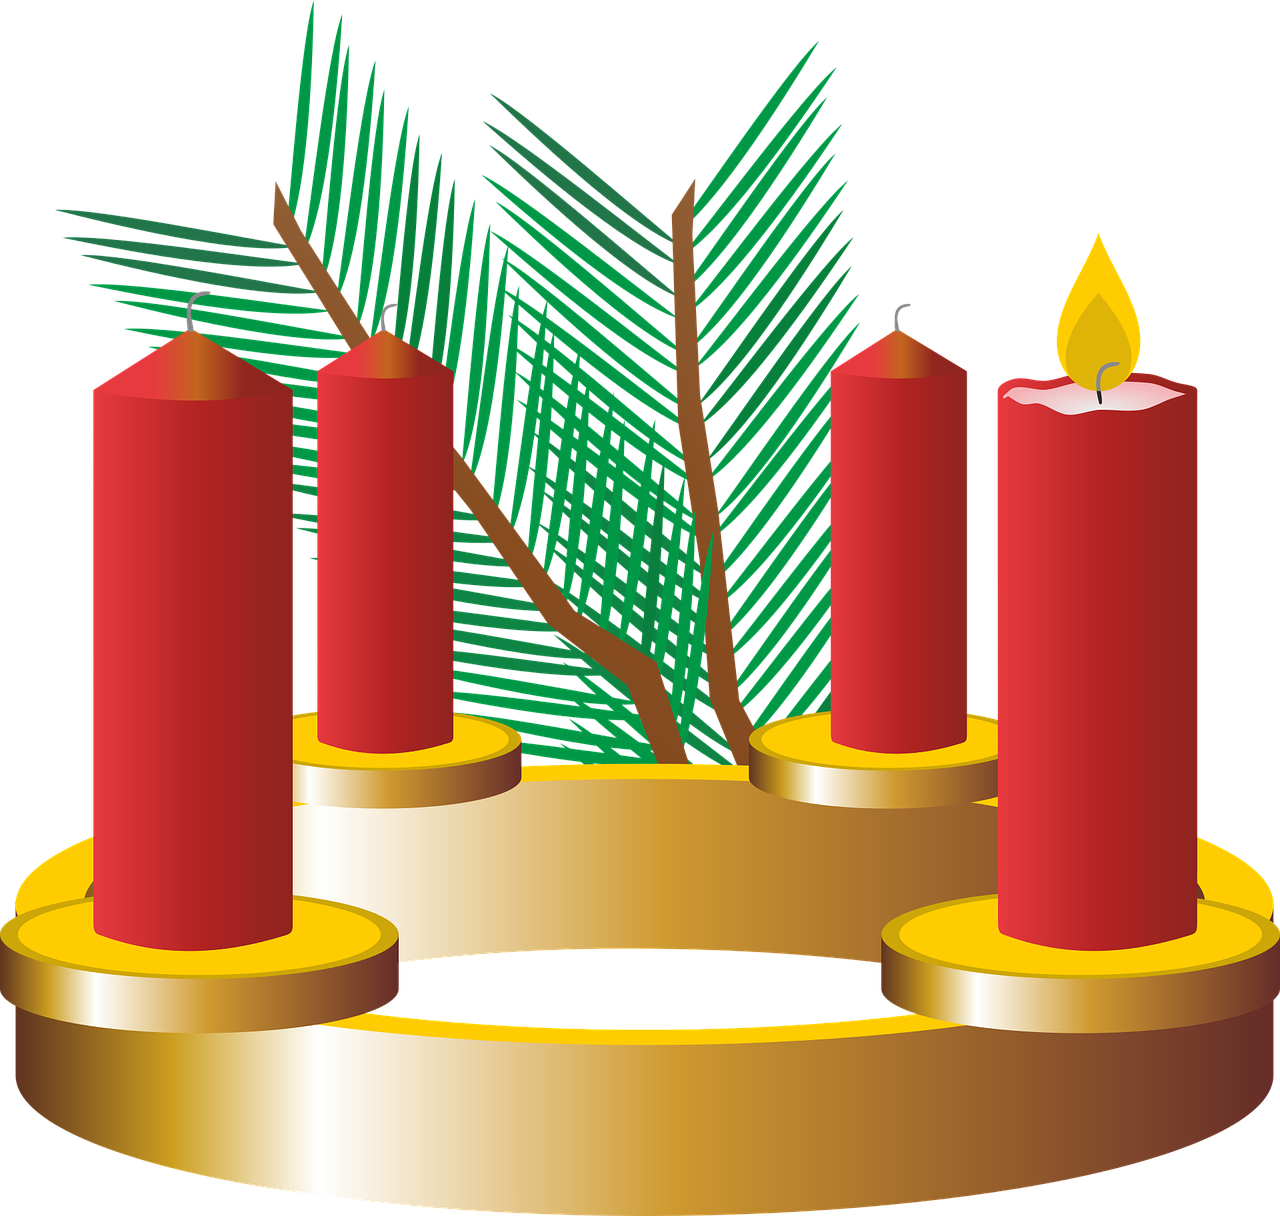 First Advent Advent Wreath Advent png image file has been added to the Firs...